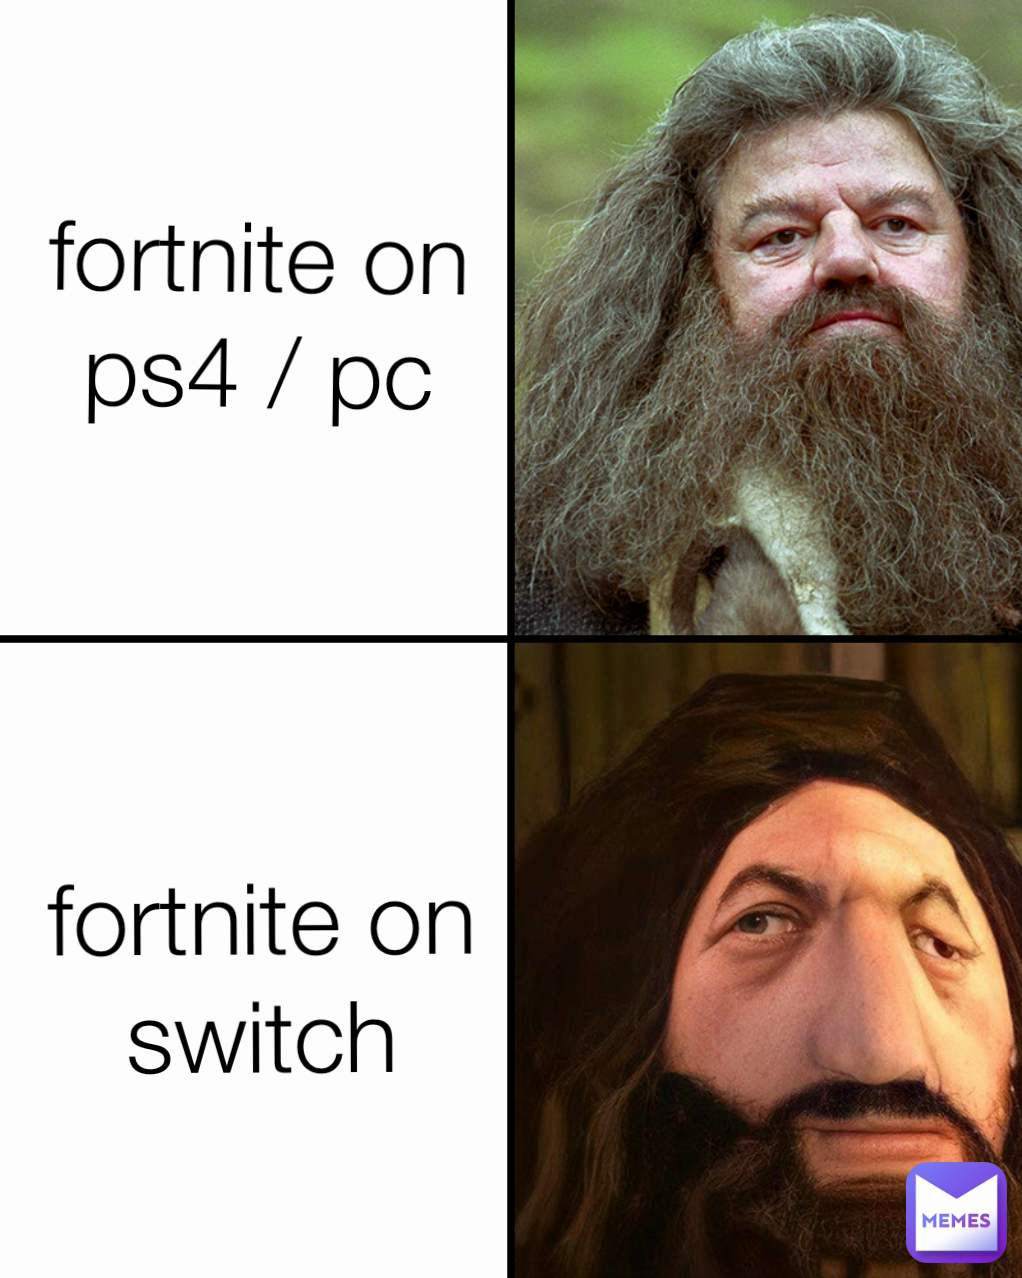 fortnite on ps4 / pc fortnite on switch